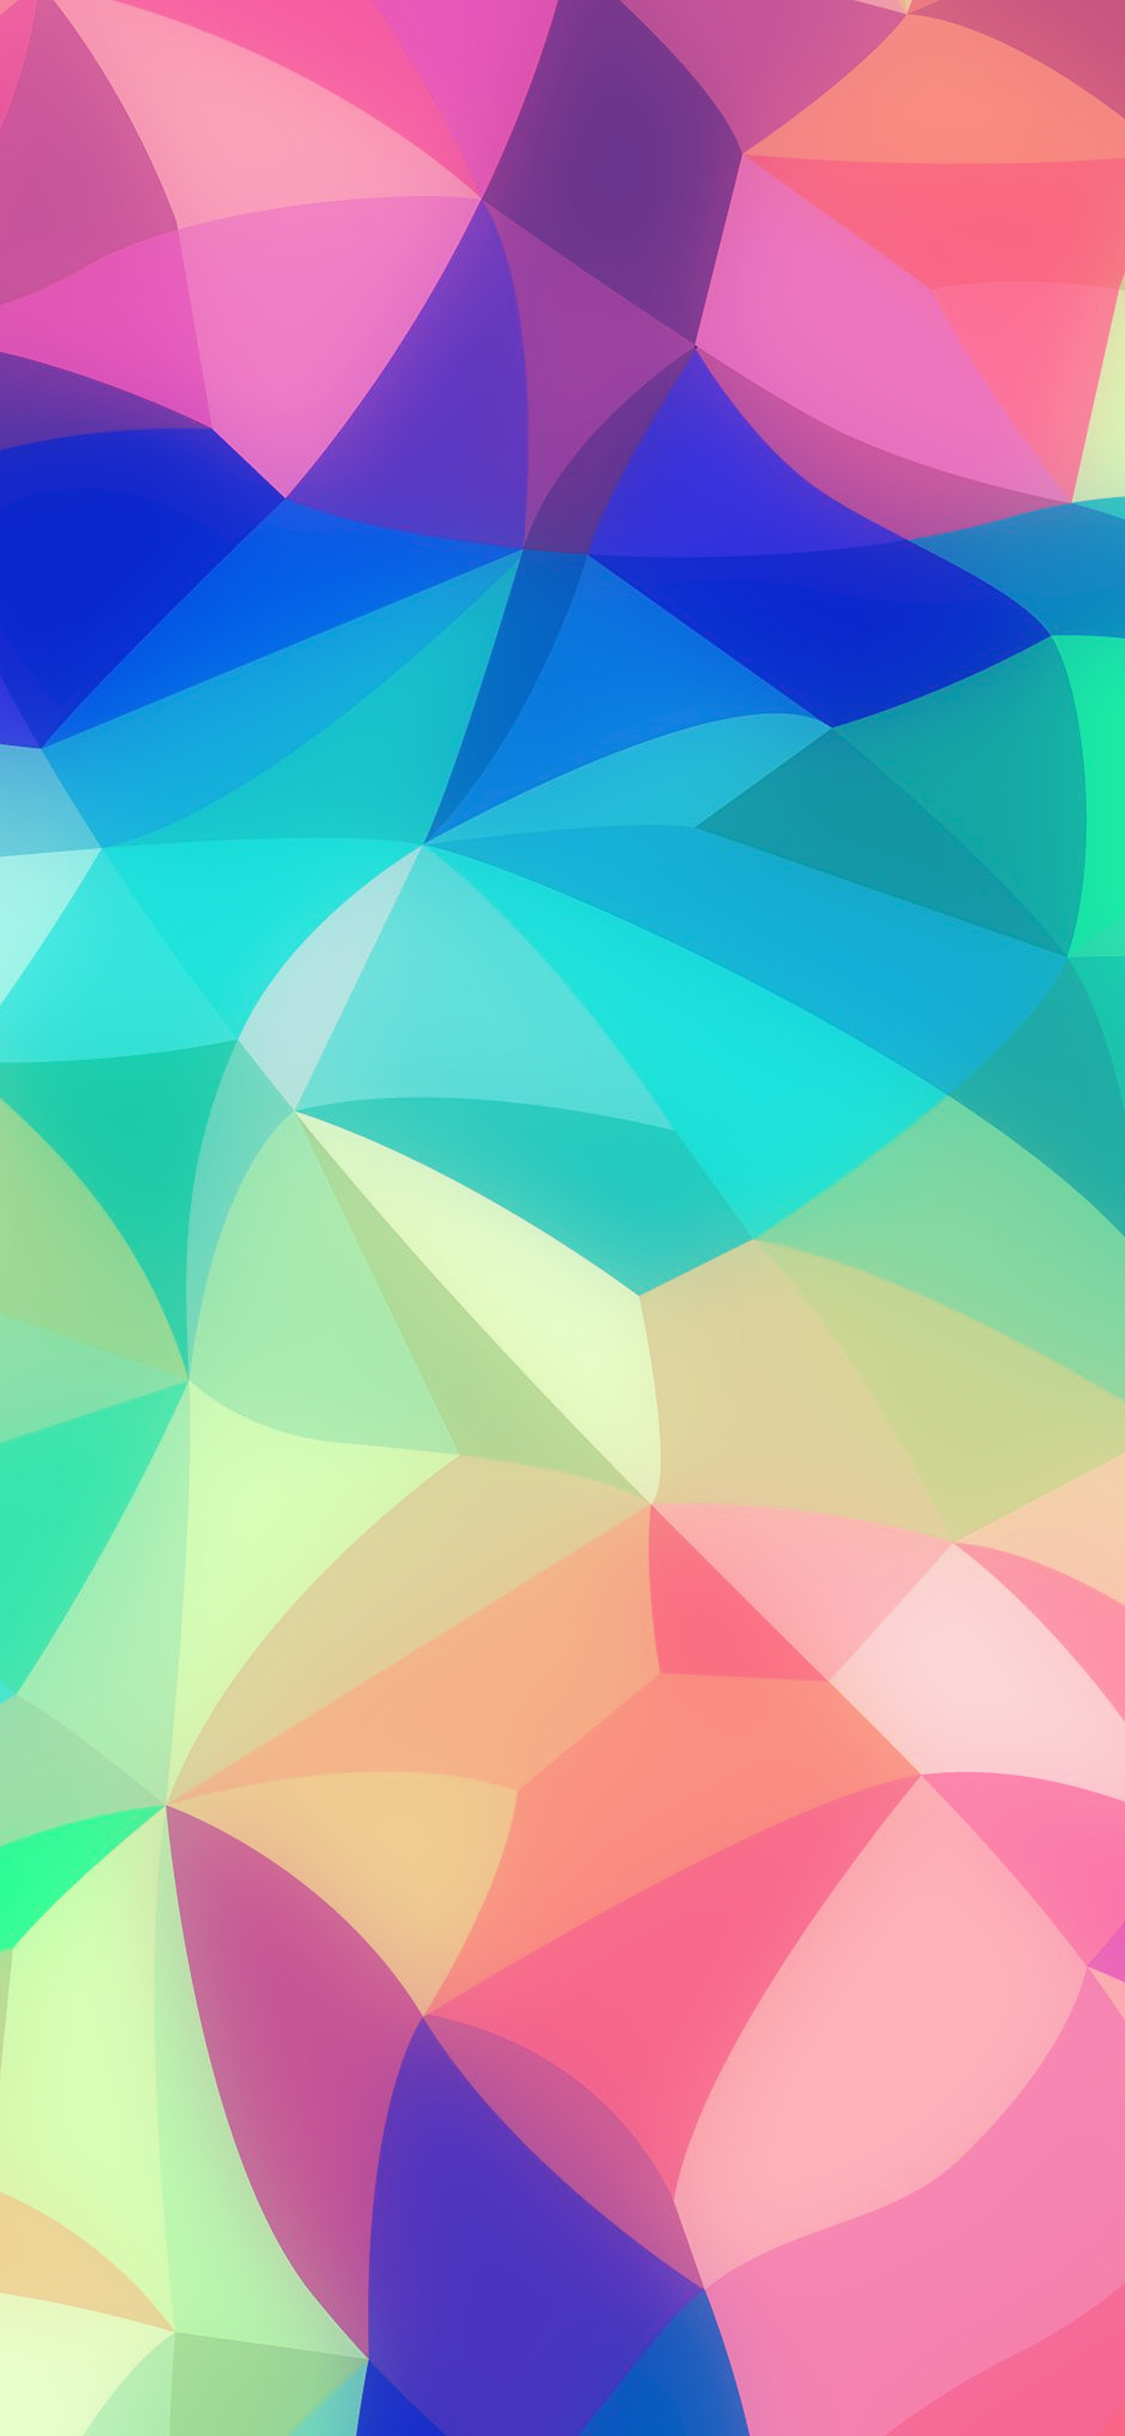 iPhone X wallpaper. rainbow abstract colors pastel soft pattern